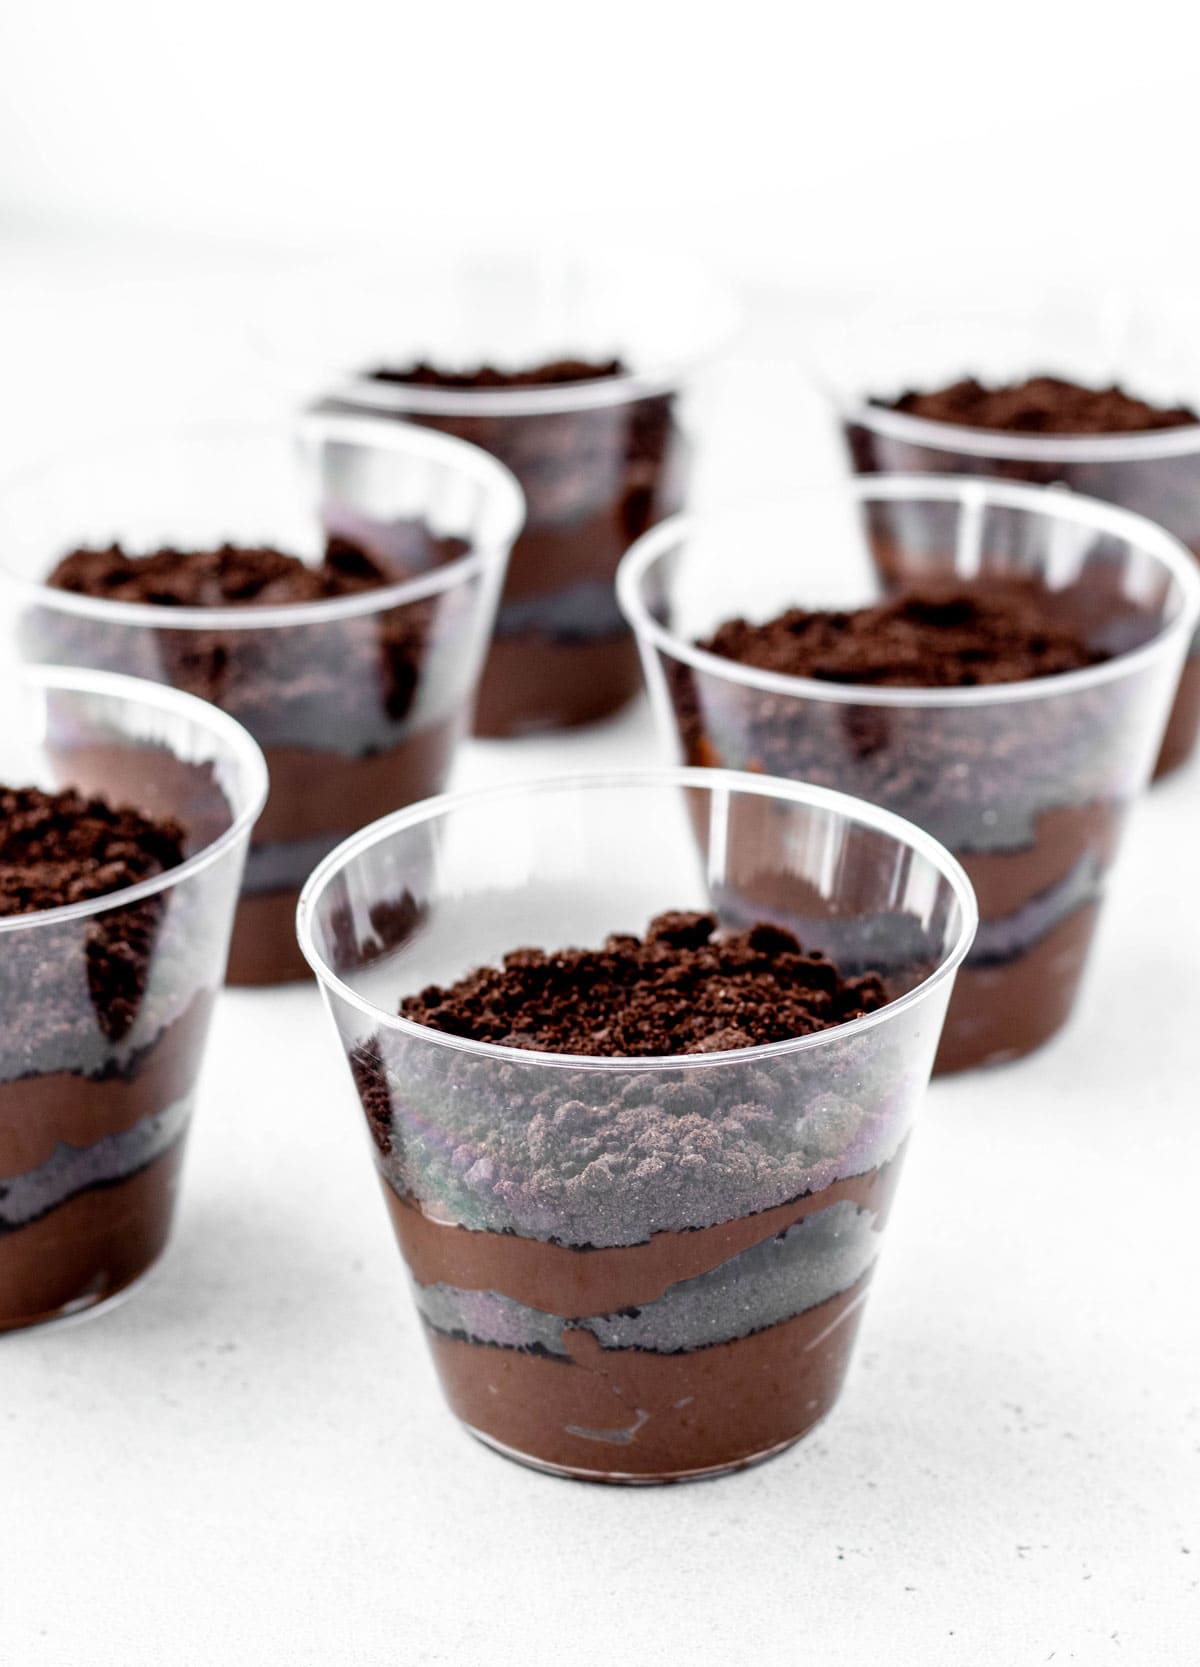 Oreo crumbs layered with chocolate avocado pudding in clear cups.